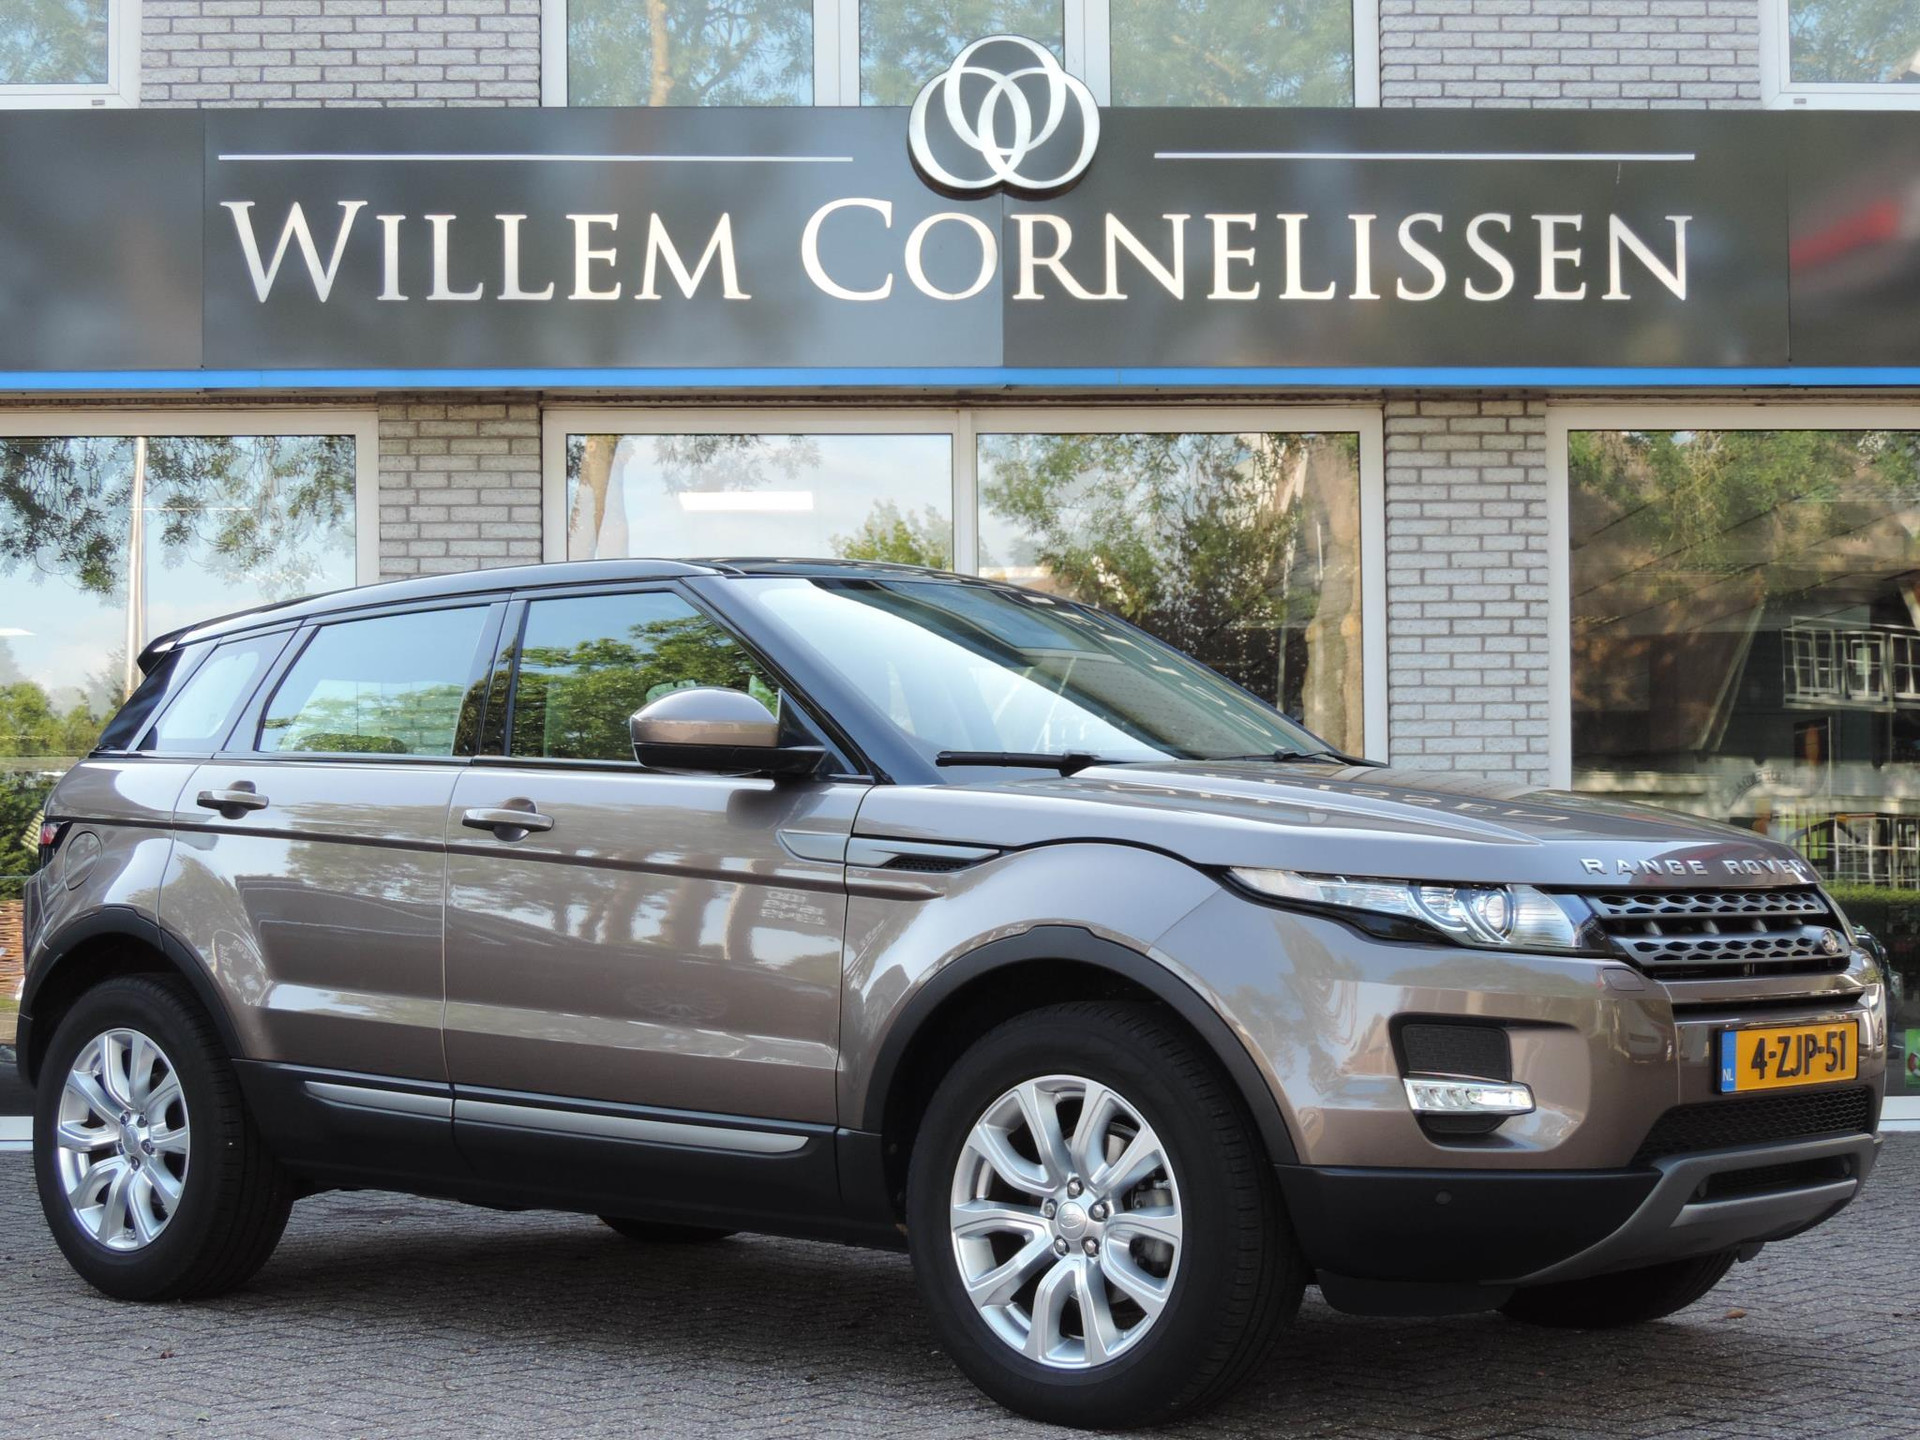 Land Rover Range Rover Evoque 2.2 TD4 Aut 4WD Pure Business Edition Pano Camera